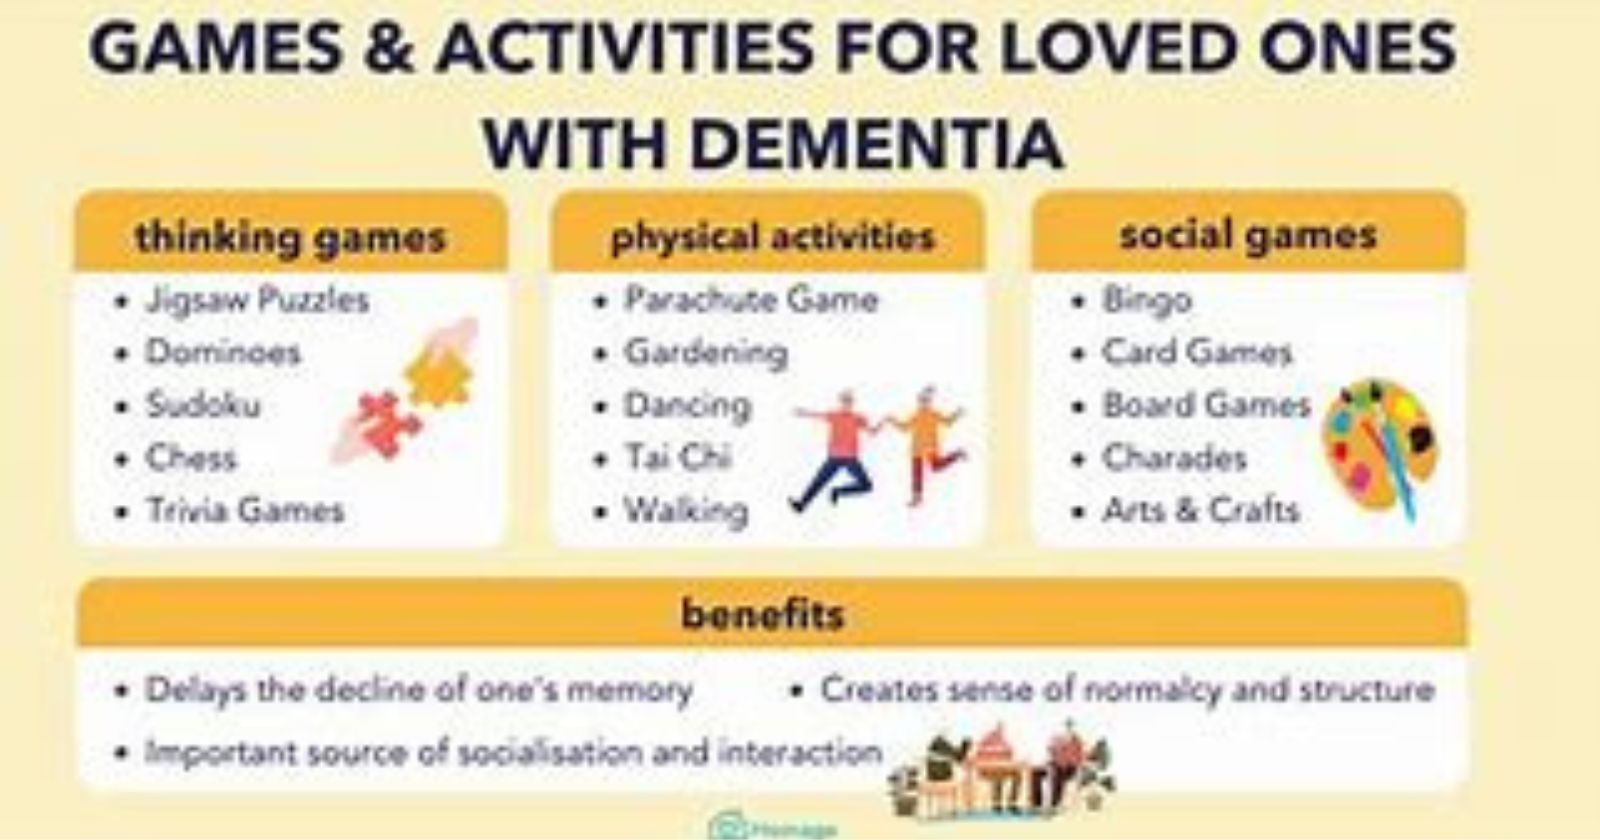 12 Helpful Engaging Activities That Your Loved One With Dementia Can Do